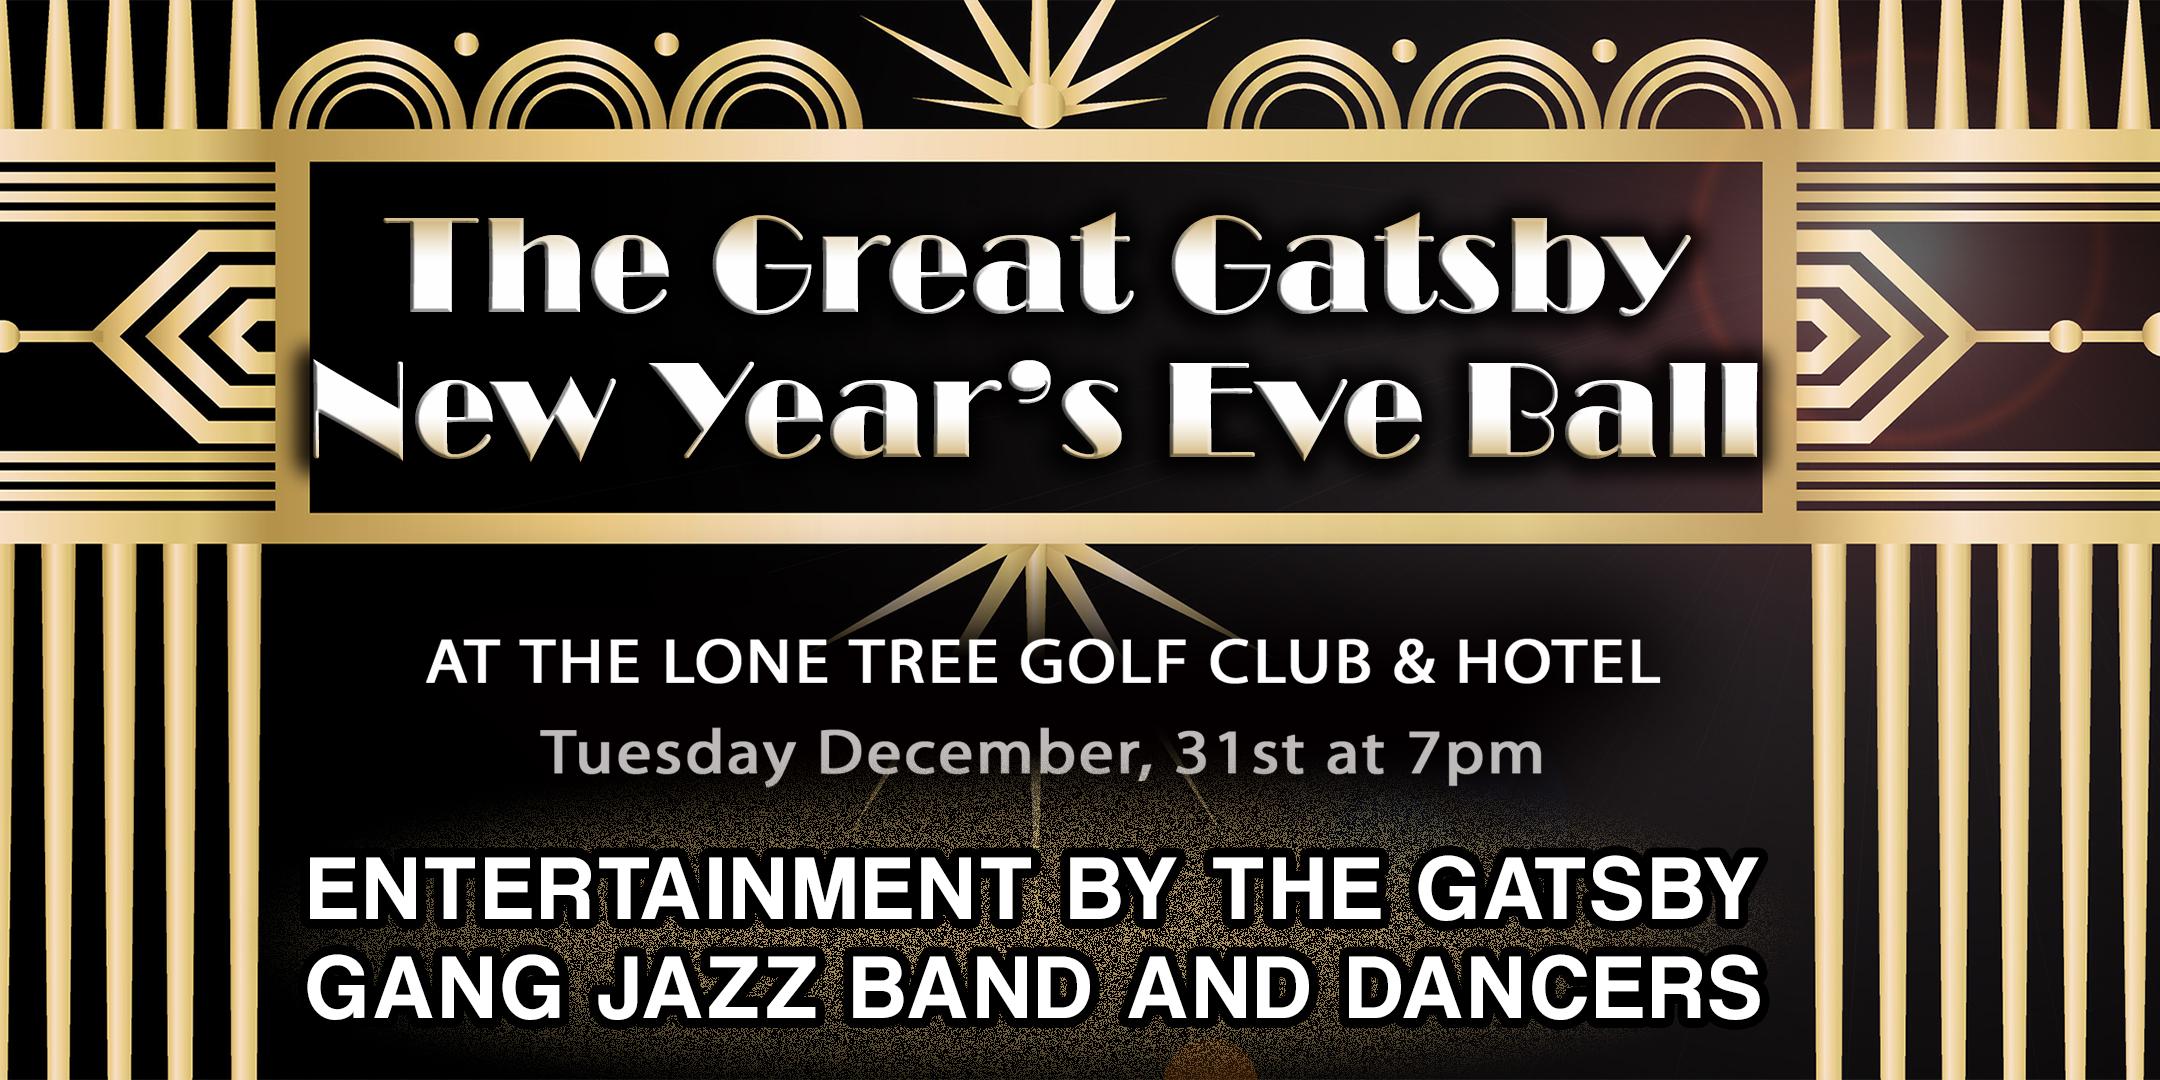 The Great Gatsby New Year's Eve Ball at Lone Tree Golf Club & Hotel